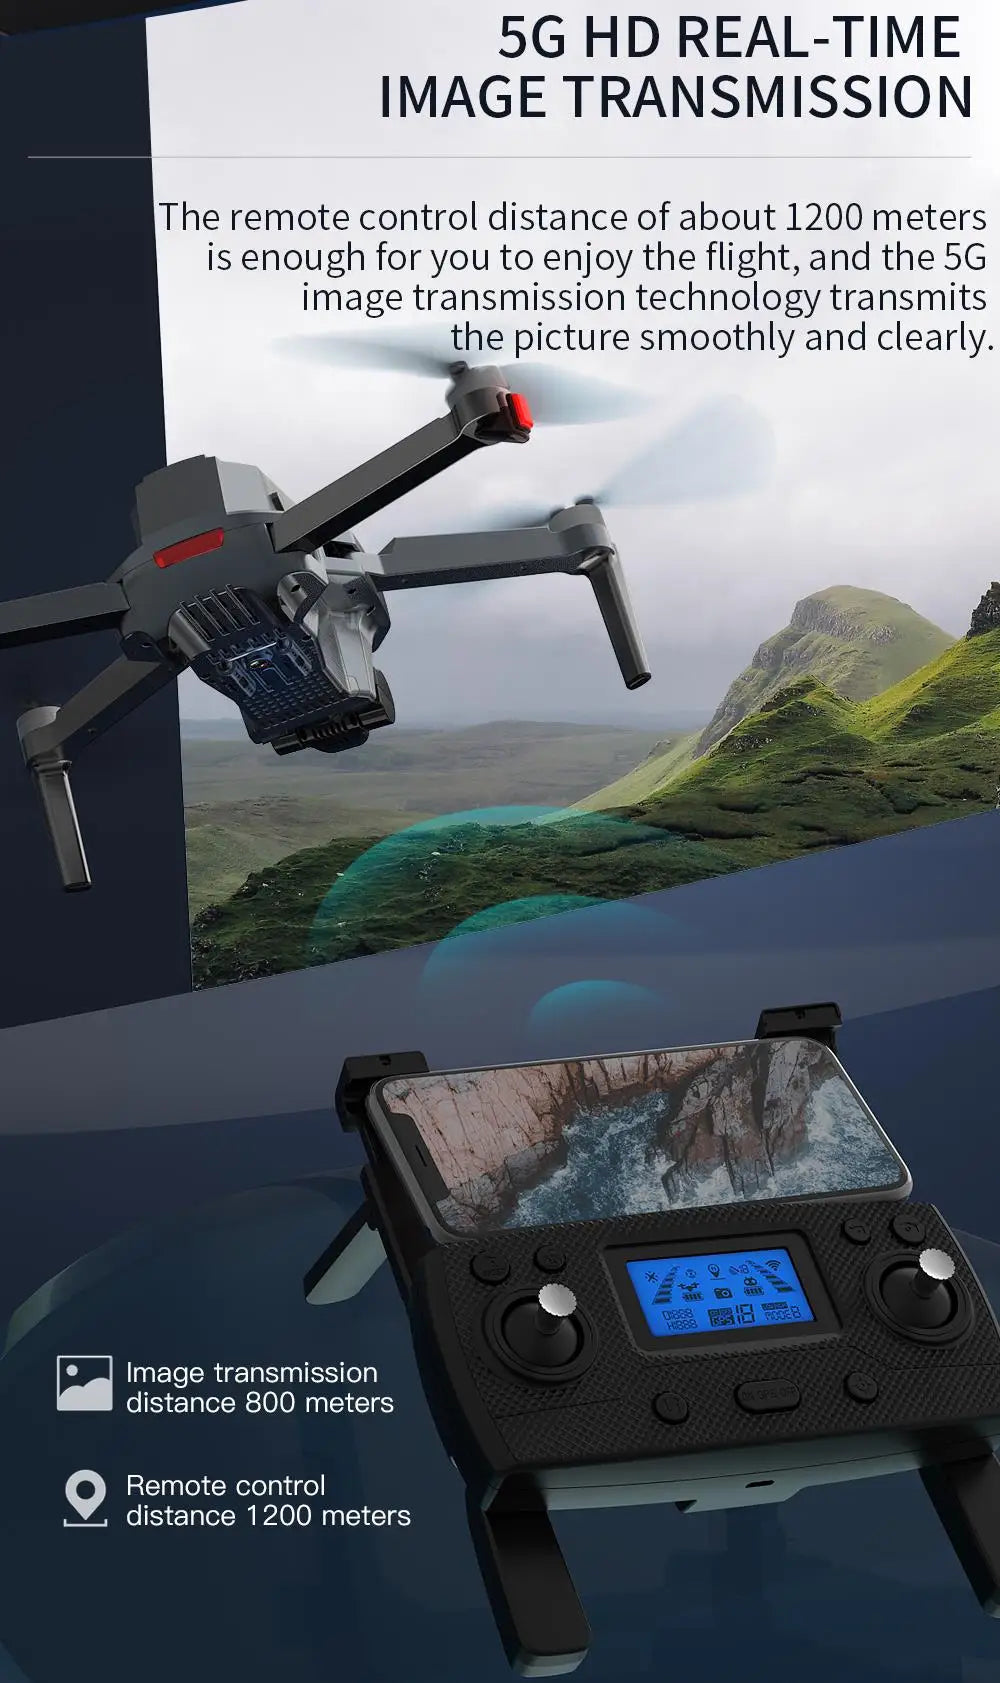 SG907 MAX GPS Drone, the remote control distance of about 1200 meters is enough for you to enjoy the flight .